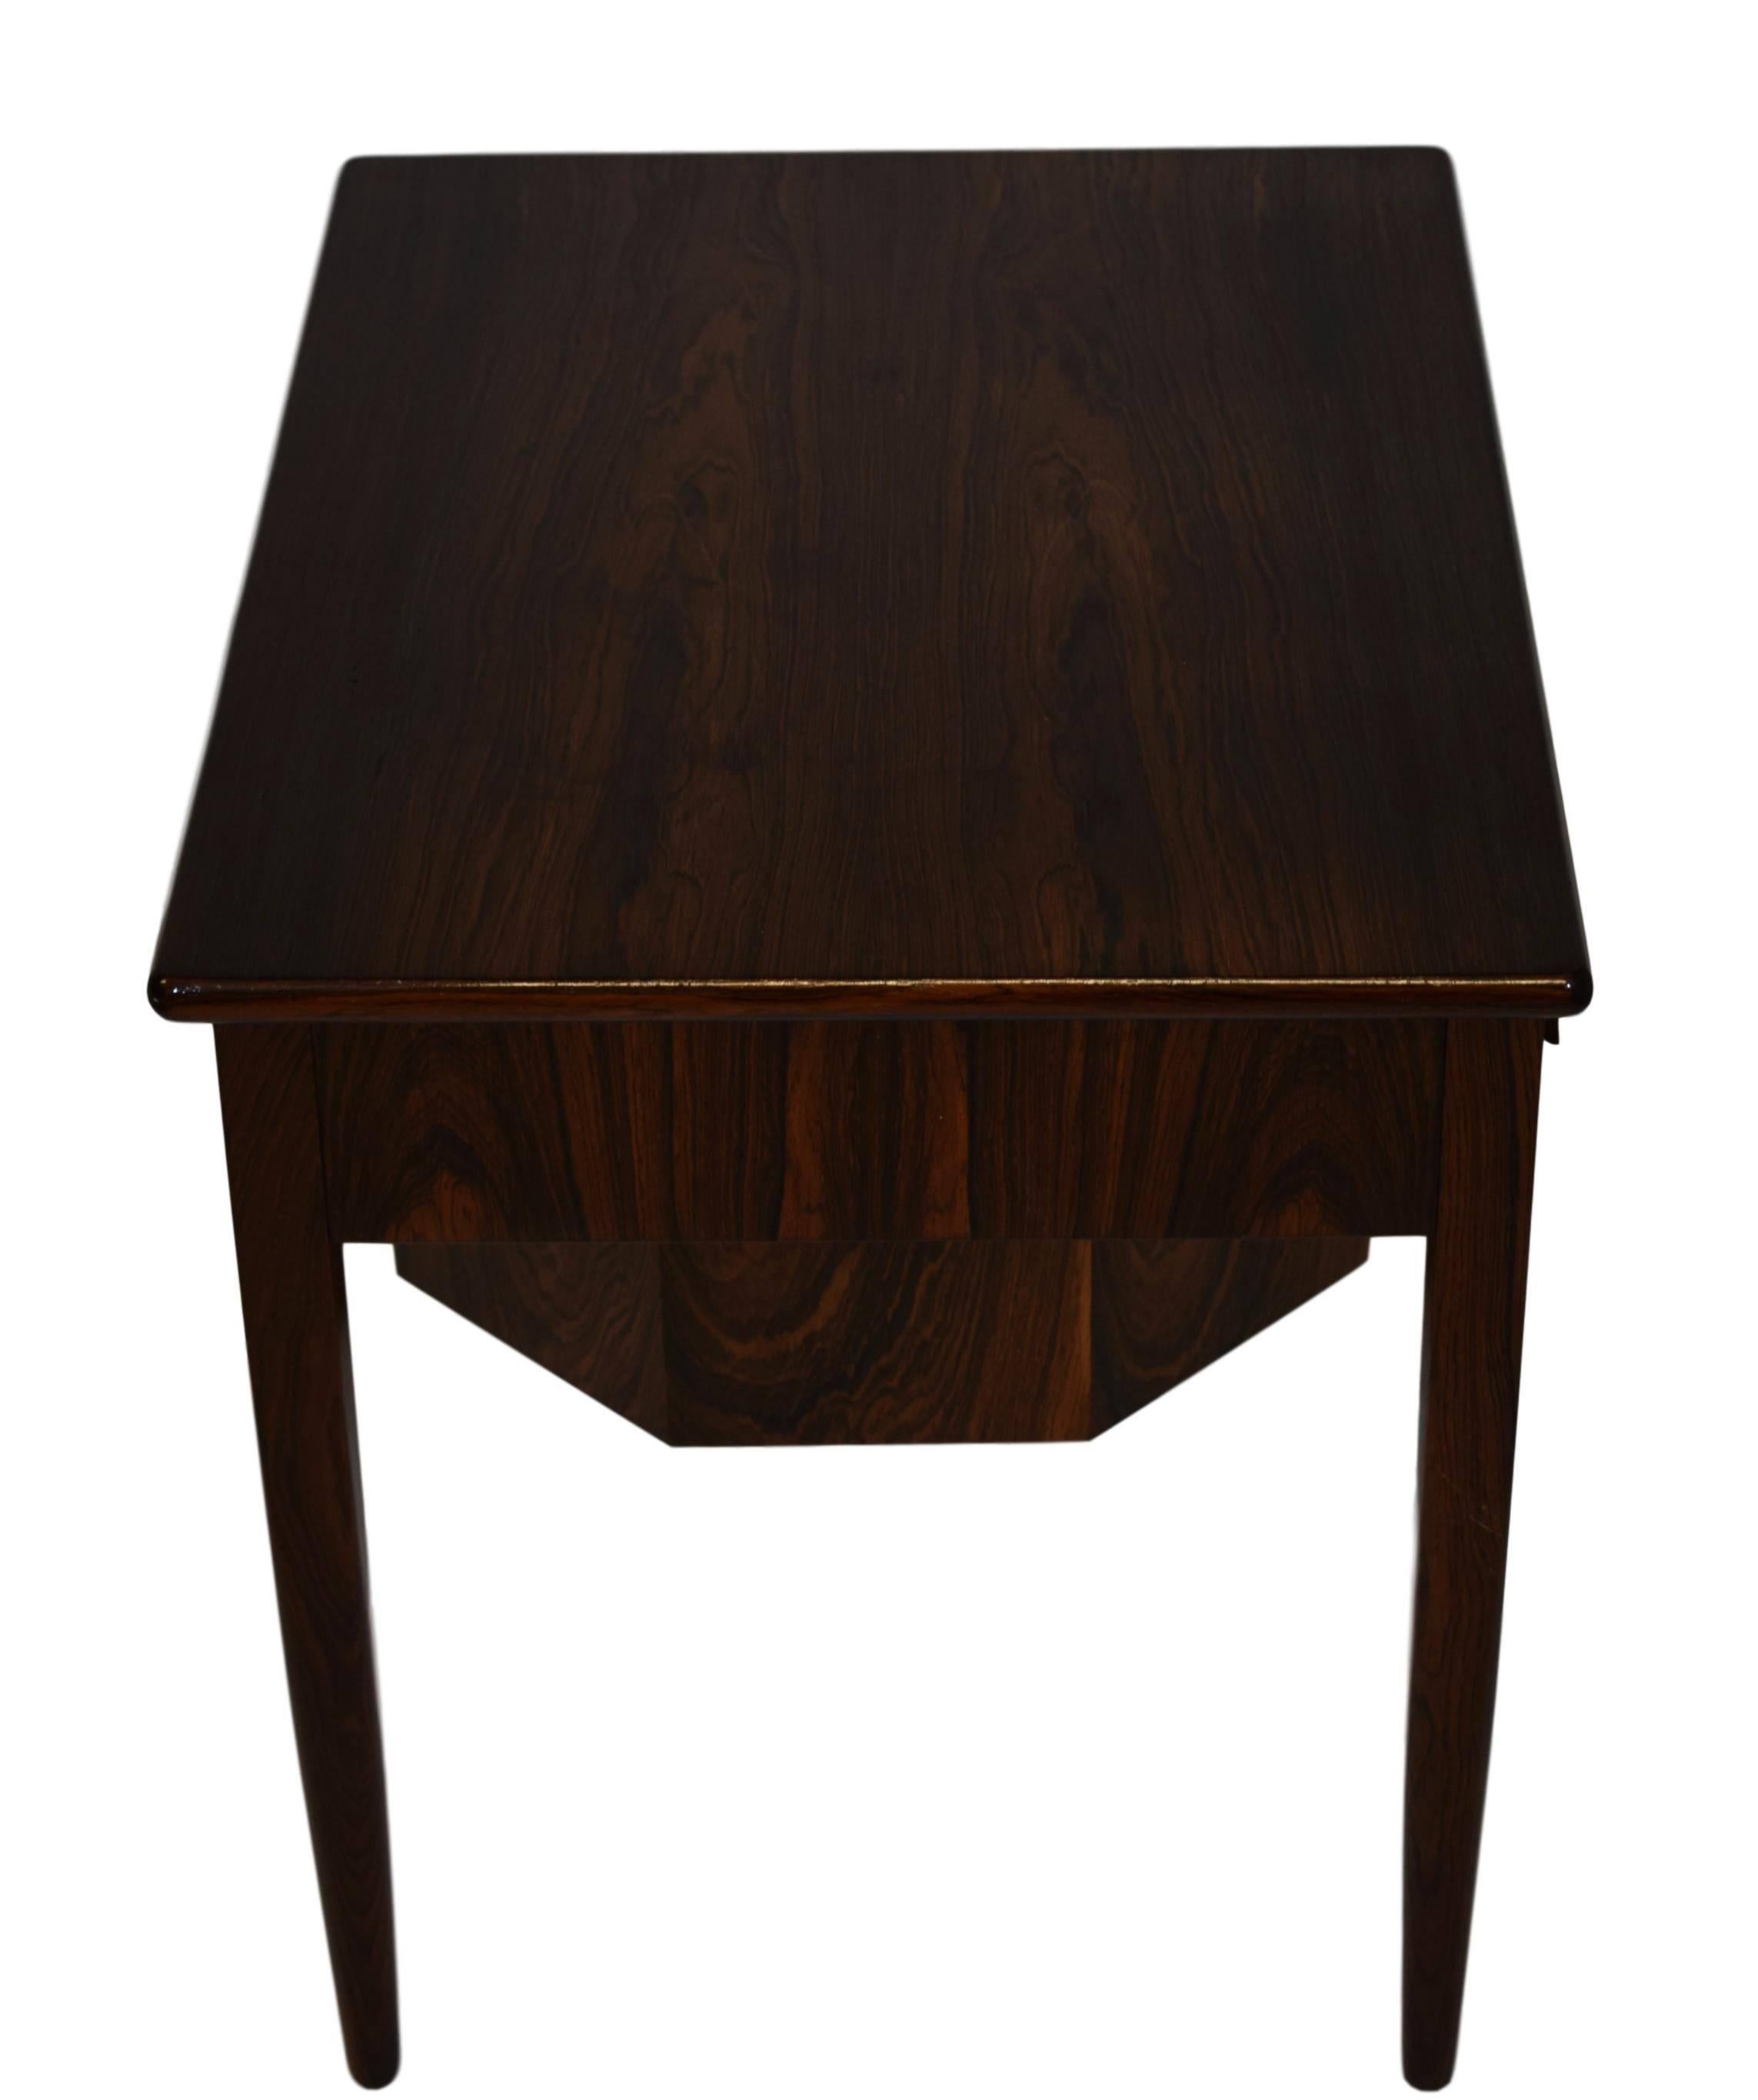 Mid-20th Century Danish Midcentury Sewing Table with Drop-Leaf by Johannes Andersen, Rosewood For Sale